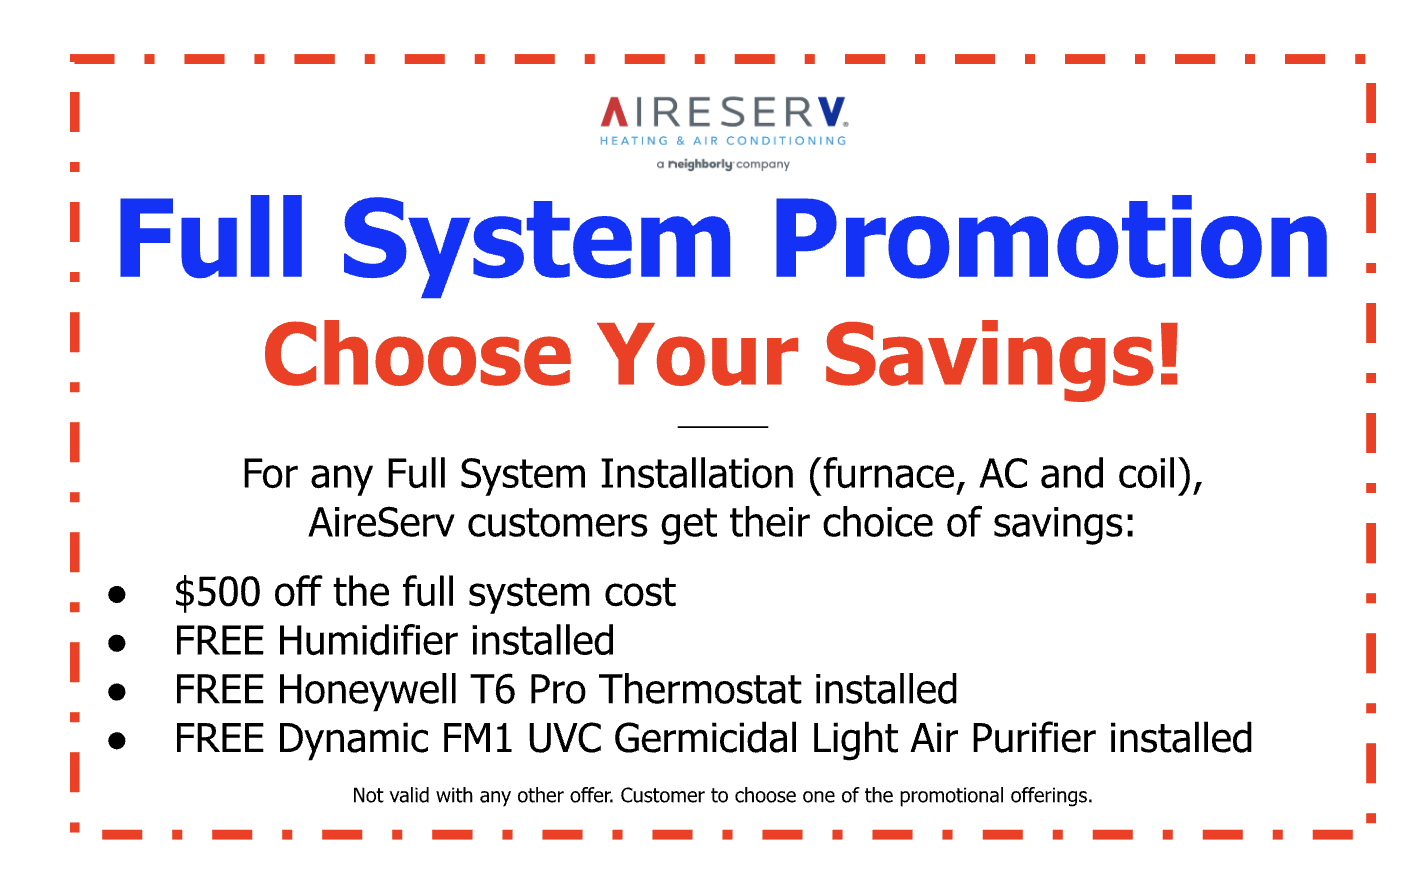 Full System Promotion. Choose Your Savings! Terms and conditions apply.